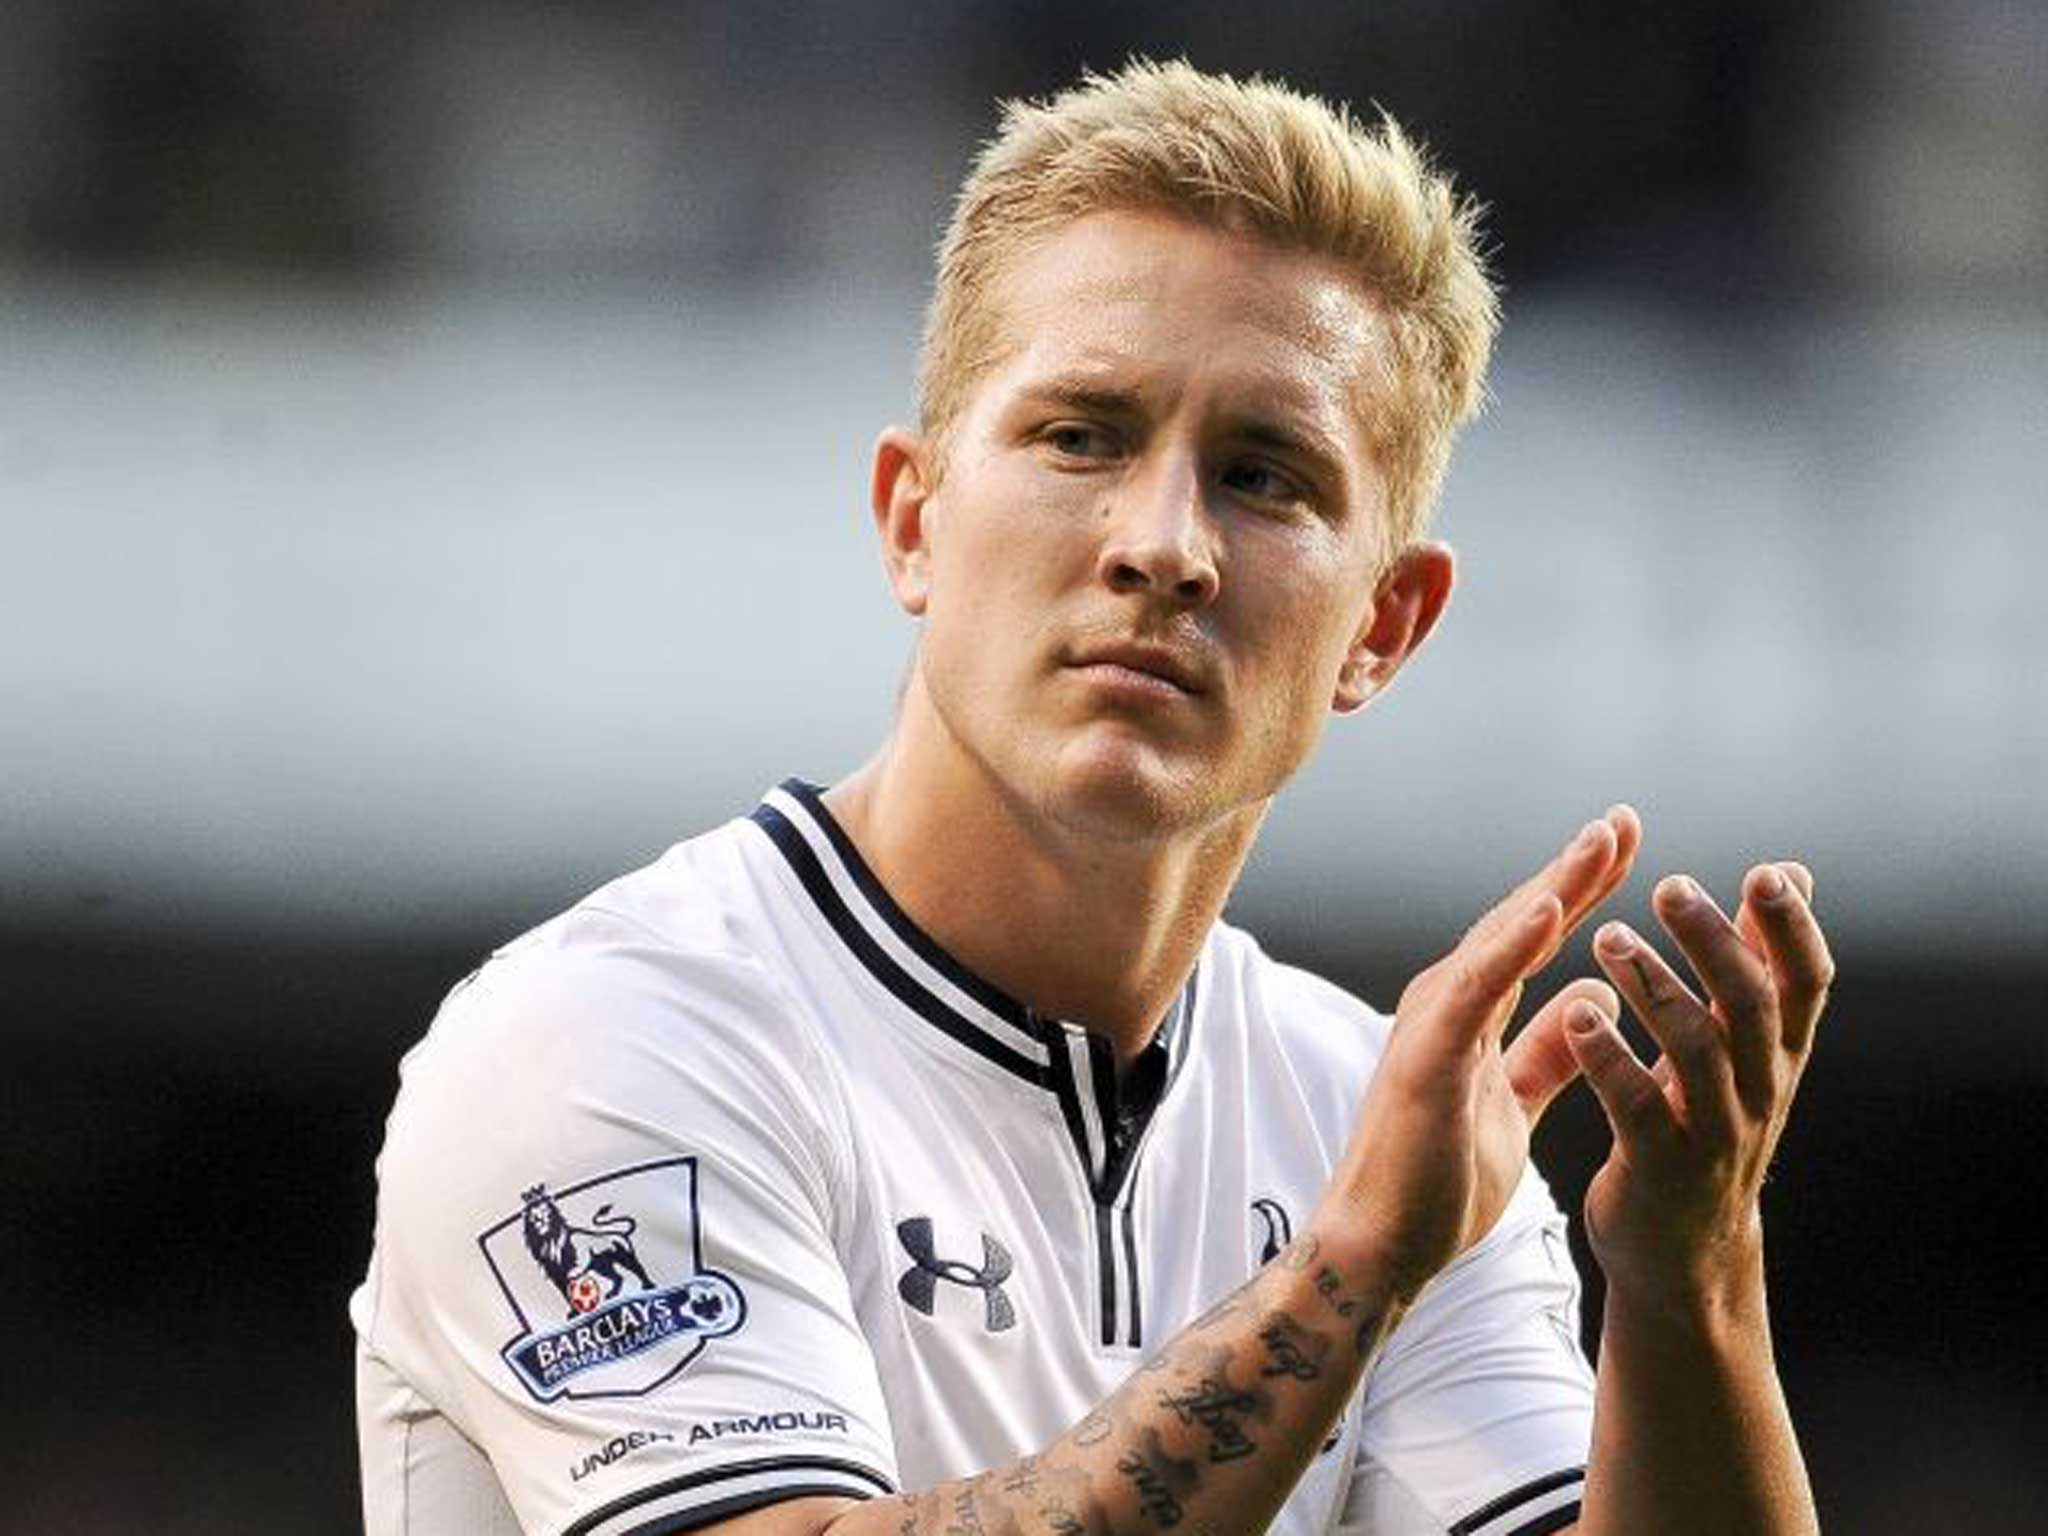 Lewis Holtby has joined Fulham on loan from Tottenham